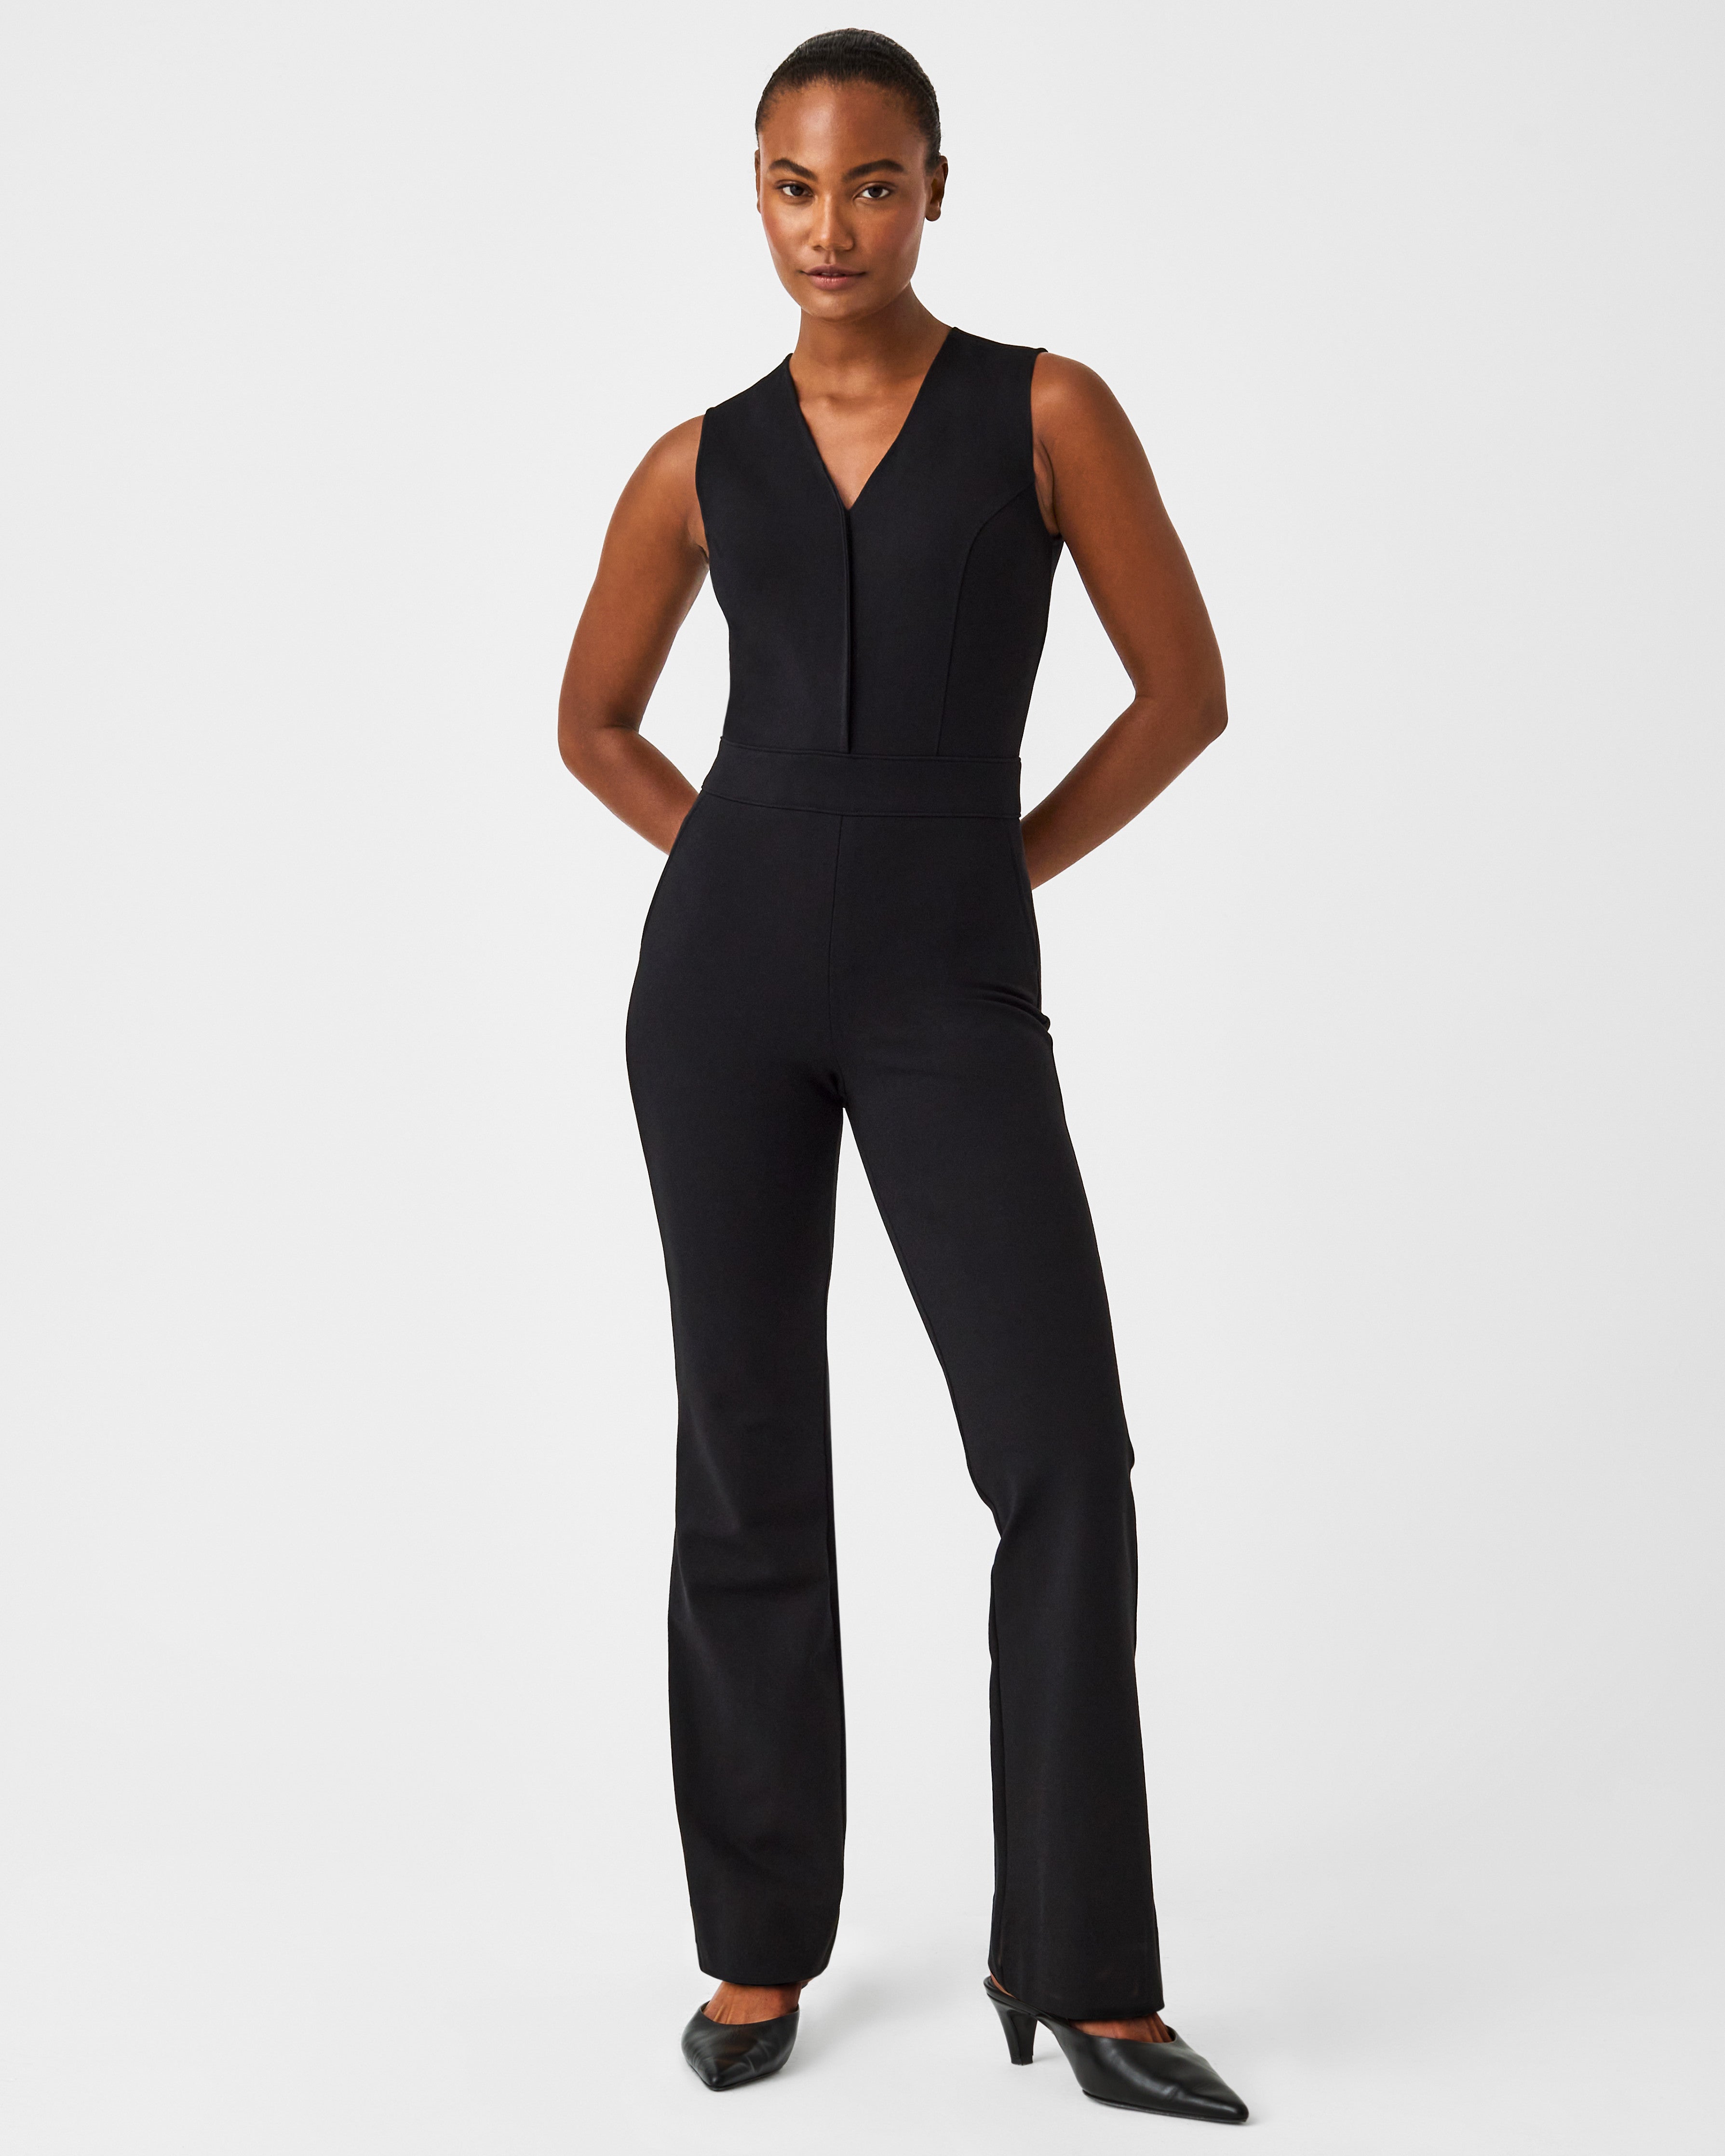 The Perfect Holiday Look, featuring The Perfect Jumpsuit. Shop @DaphneOz's  must-have holiday looks now at Spanx.com #Spanx #DaphneOz